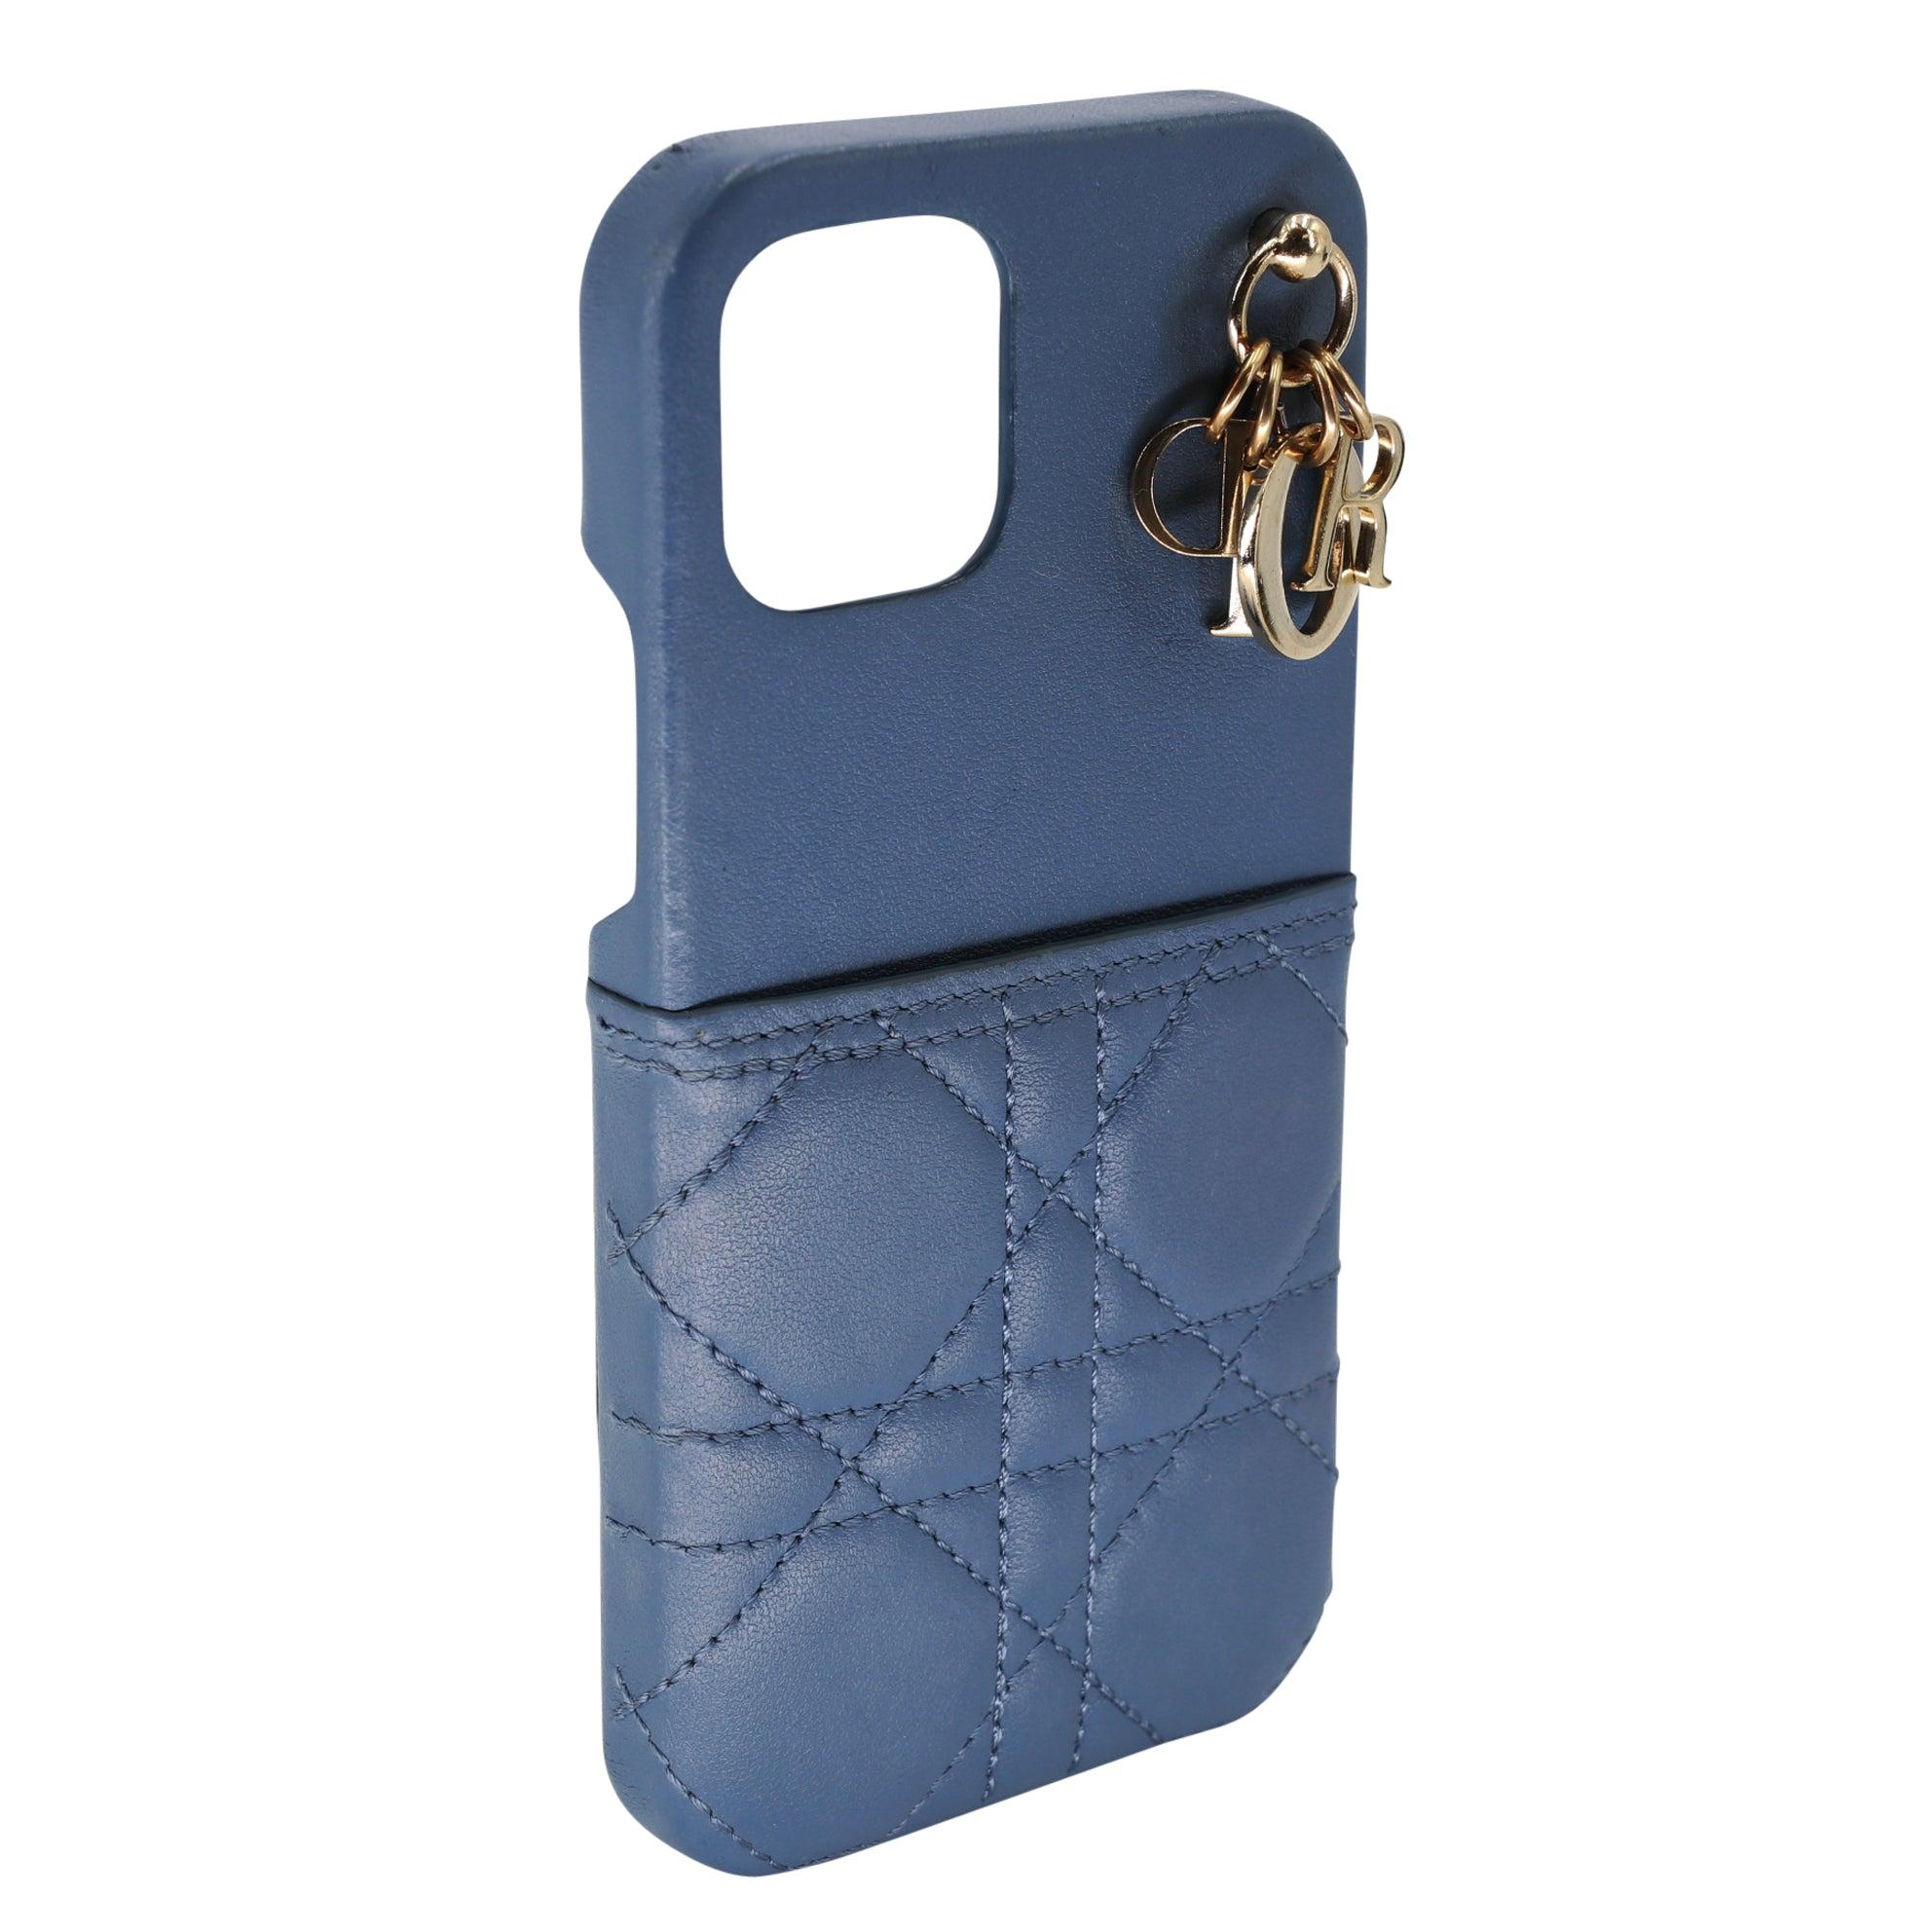 This splendid Lady Dior iPhone 12 case from the House of Dior is not only visually appealing but also very functional and durable. It has been crafted from sky blue Cannage leather and styled with the signature gold-toned 'DIOR' letter charms,